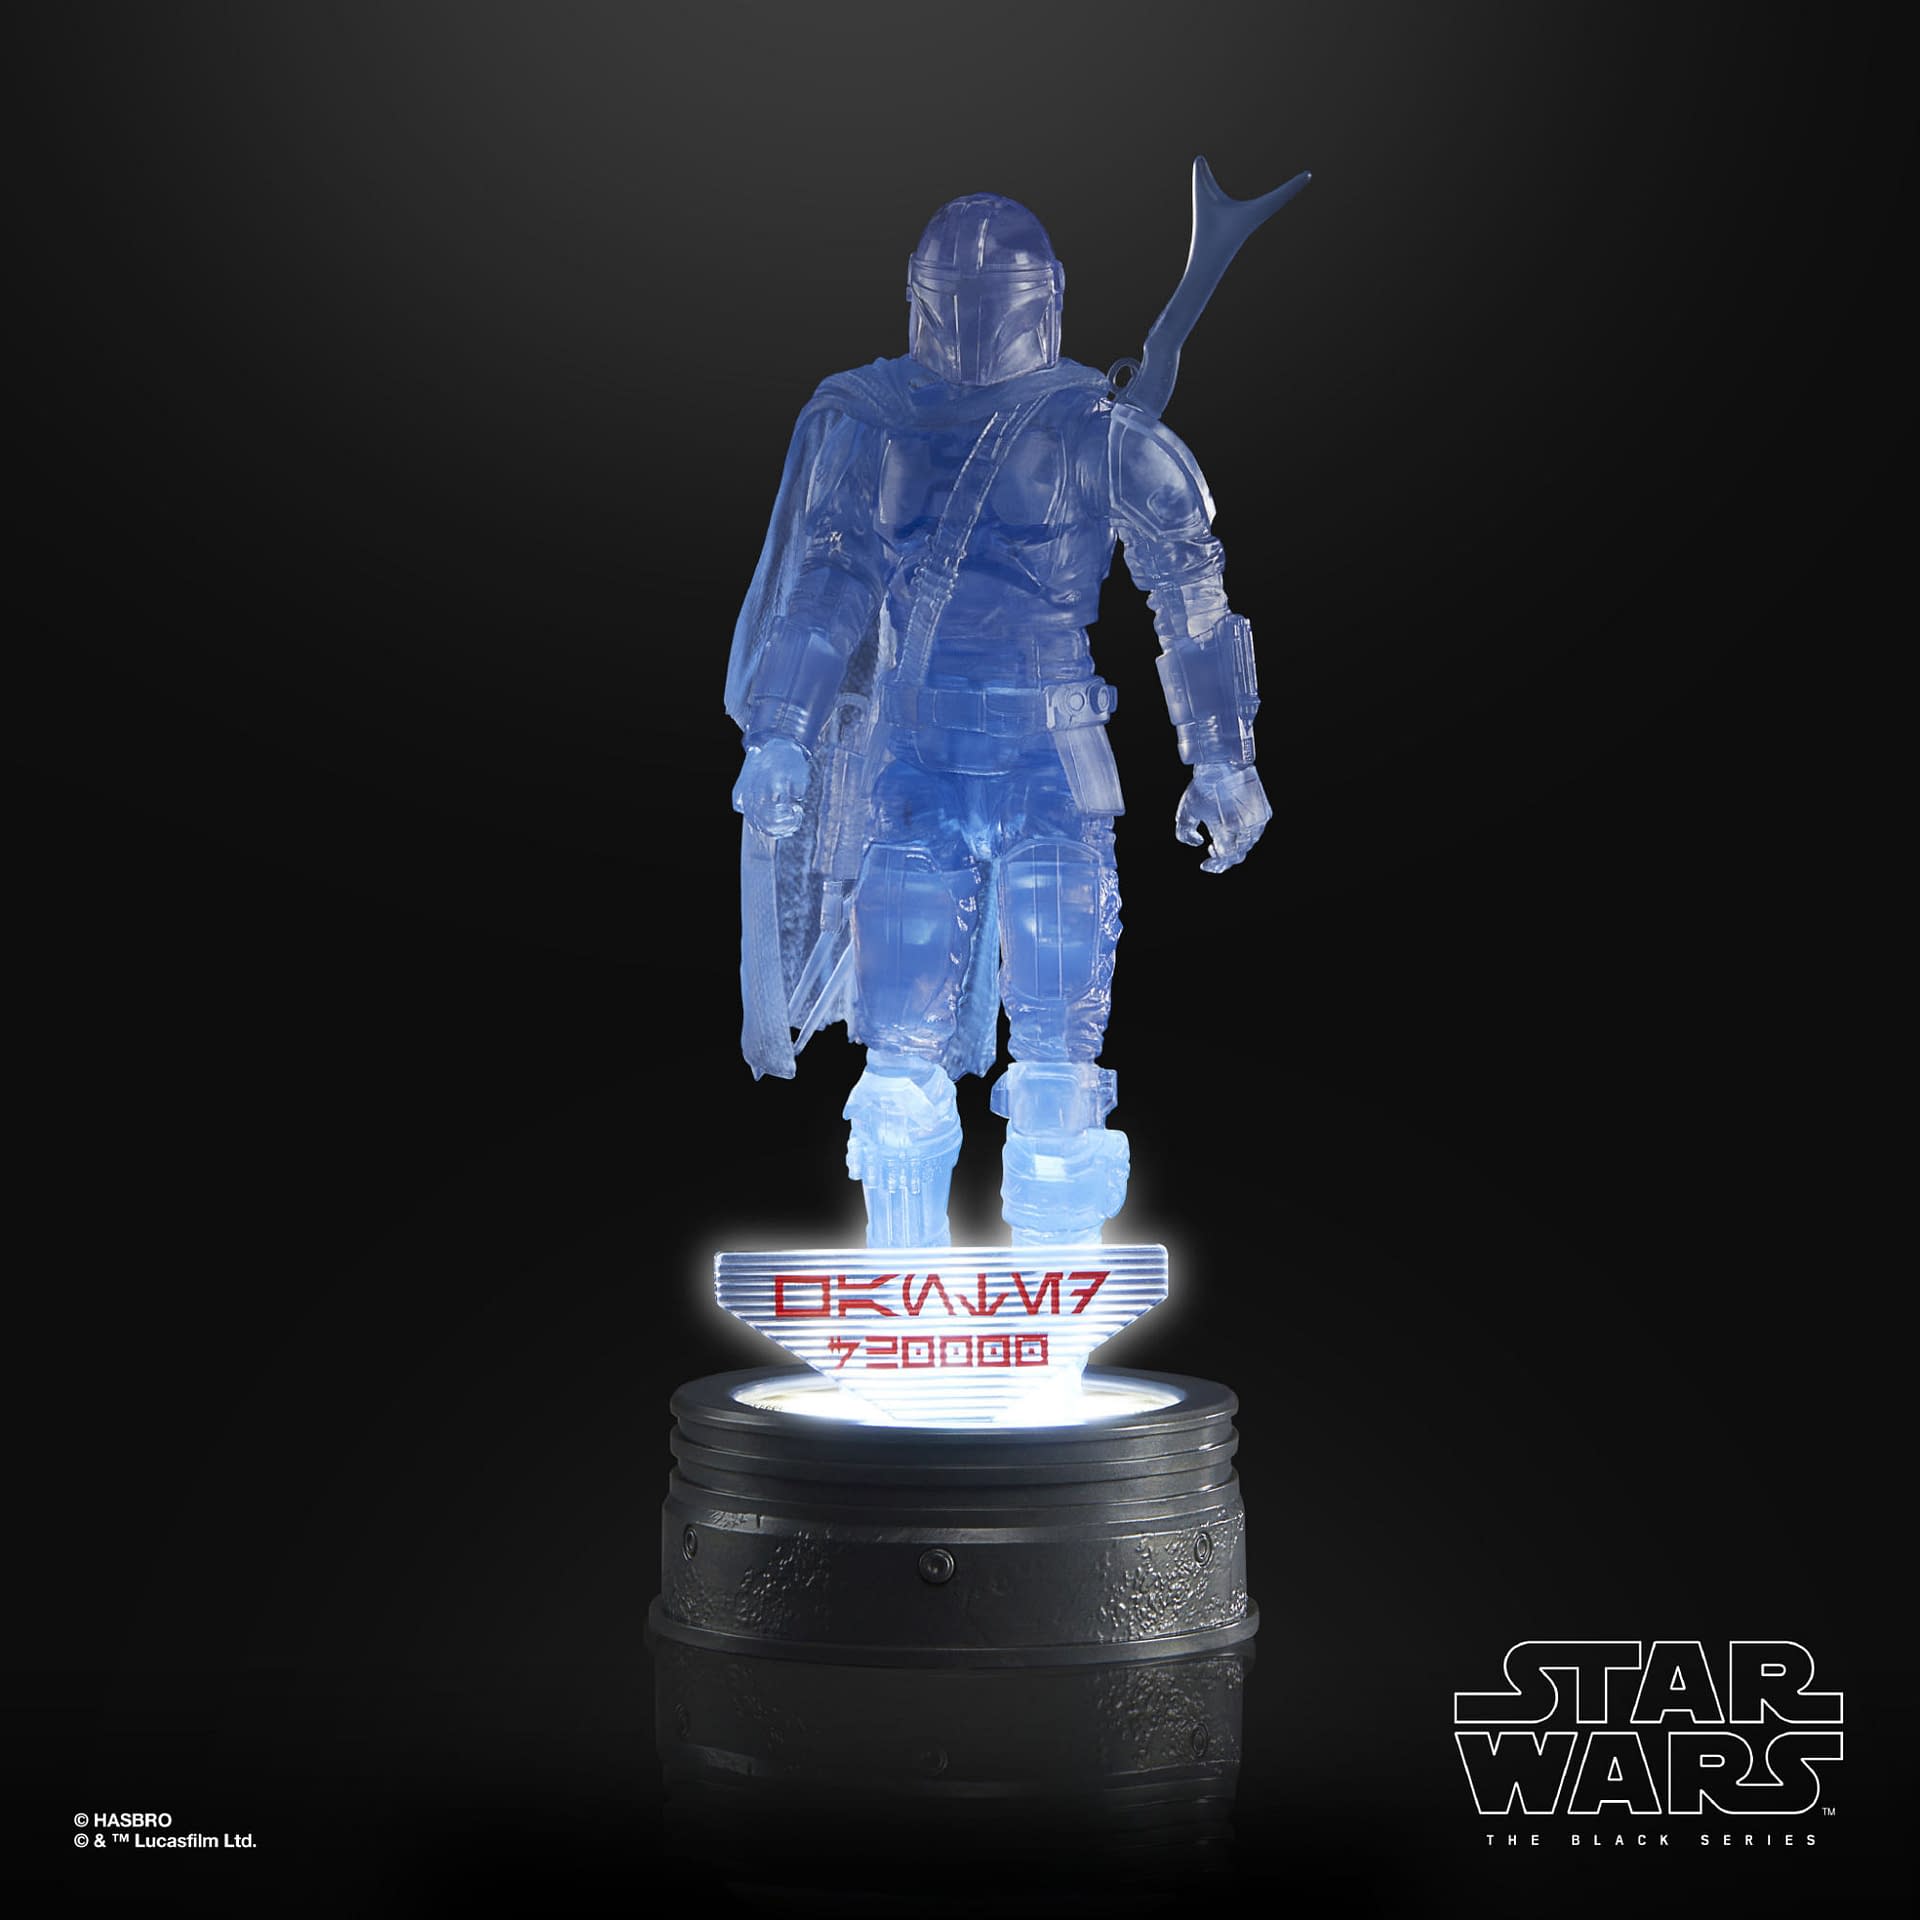 Hasbro Announces Star Wars Holocomm Collection with The Mandalorian